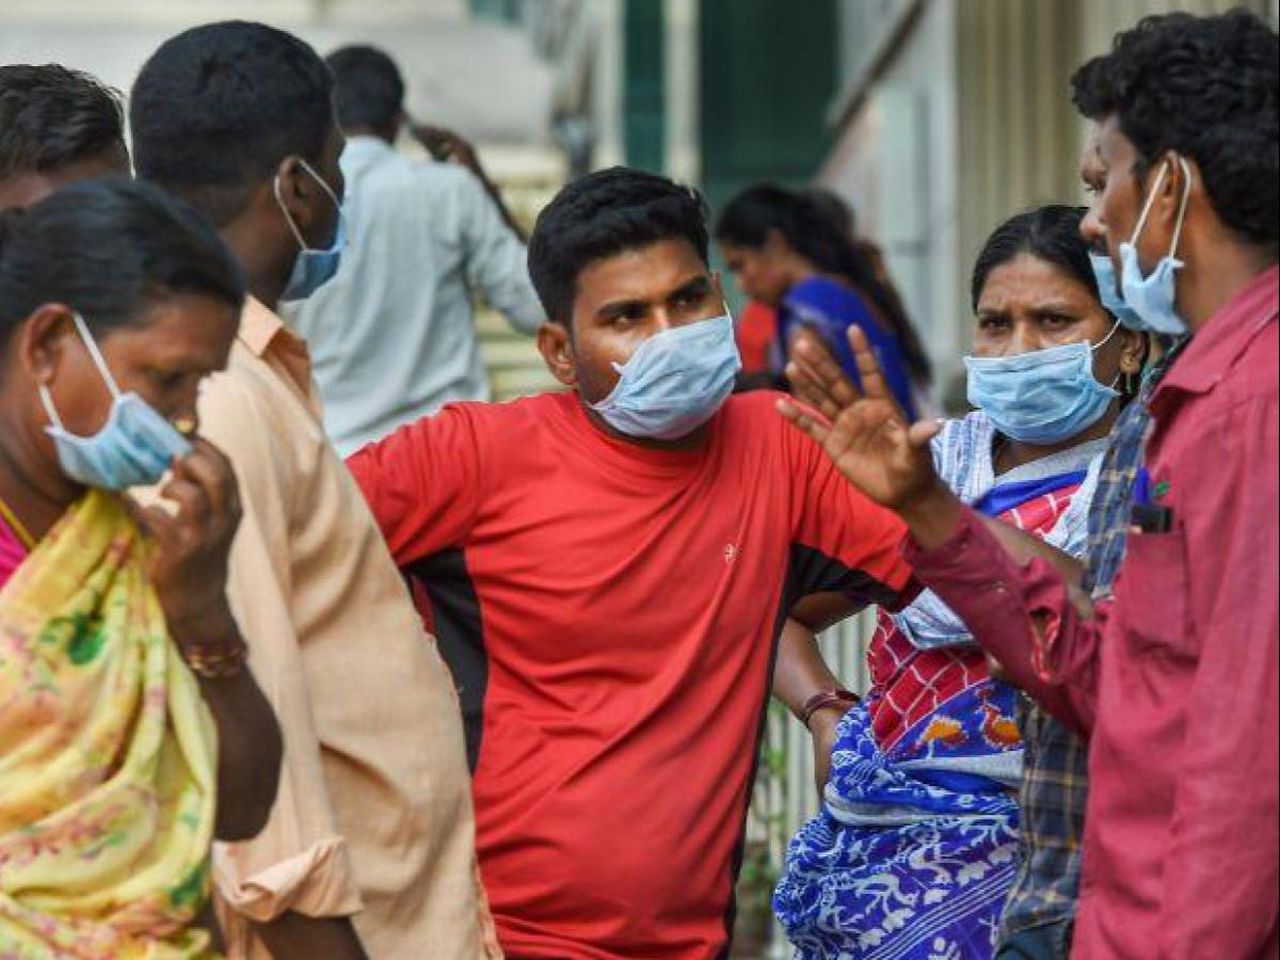 Bangladesh detects first cases of coronavirus infection. Image via Business Standard.